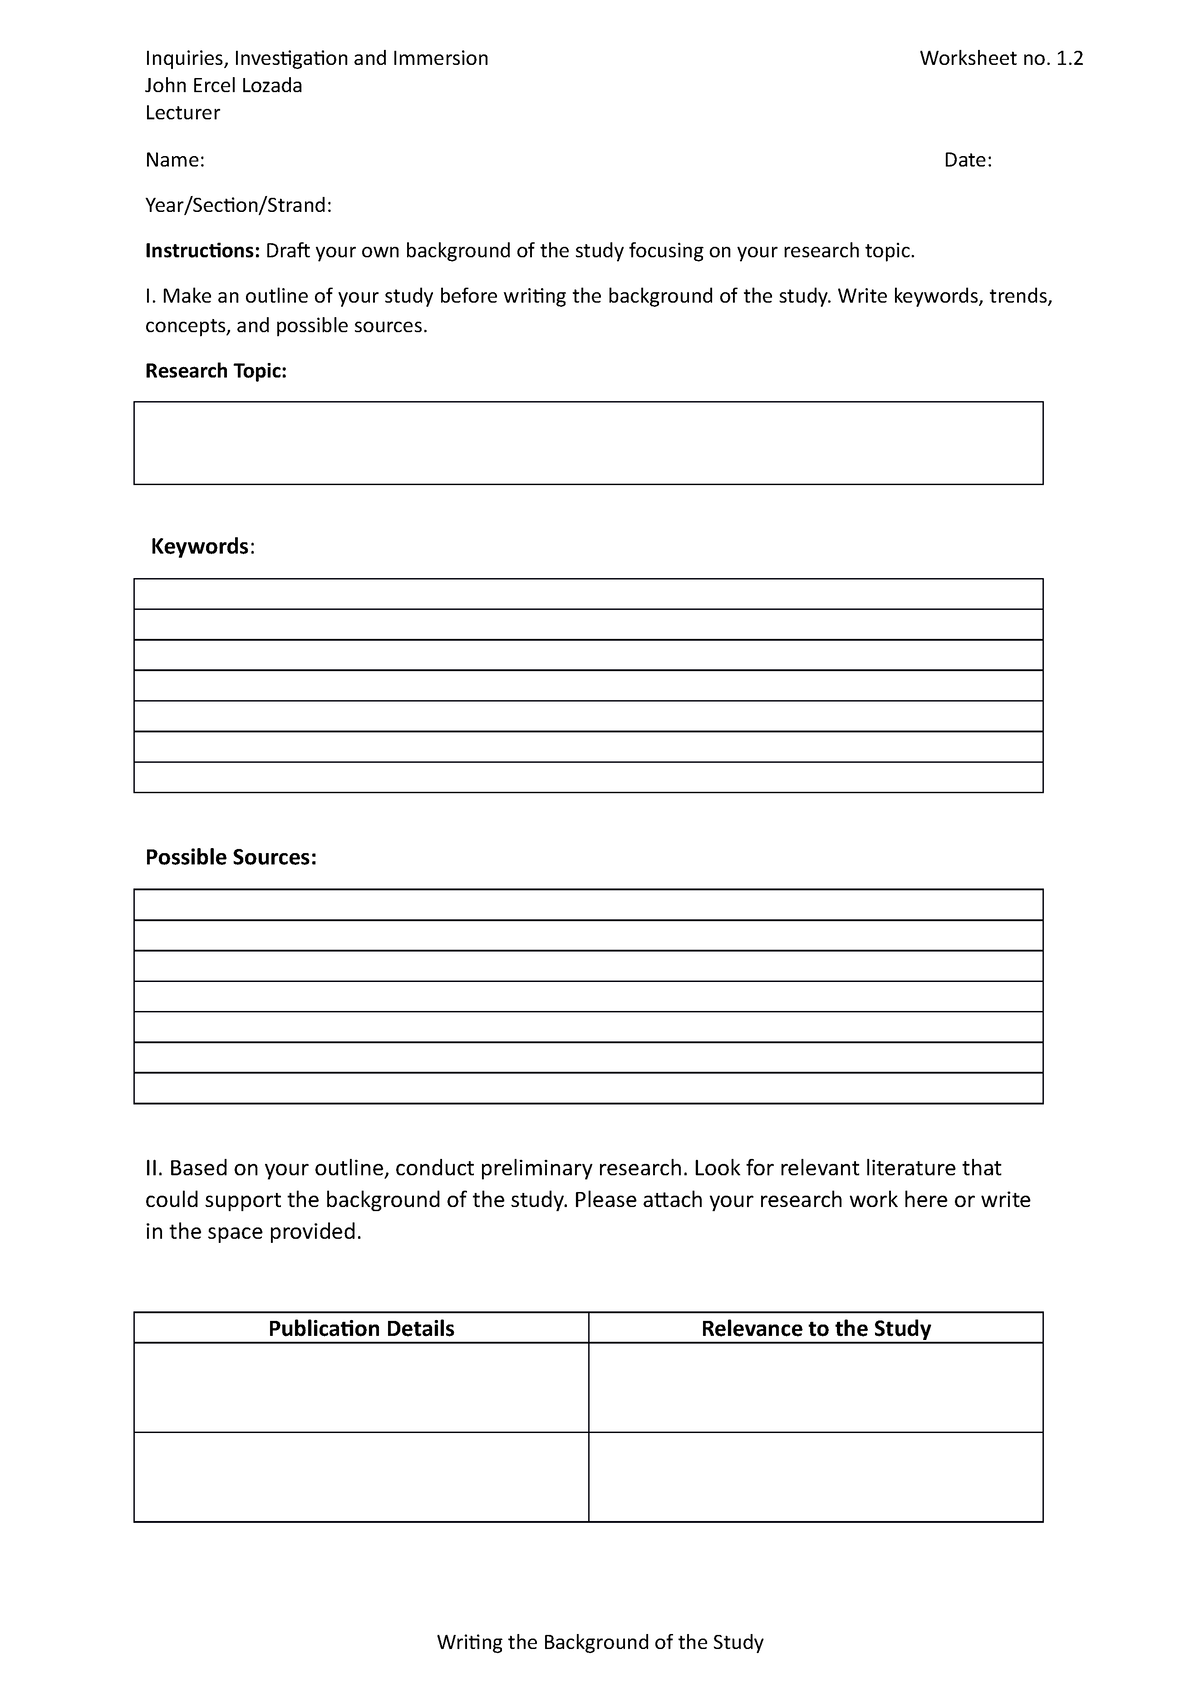 III - Worksheet no.  - Writing the Background of the Study - Inquiries,  Investigation and - Studocu